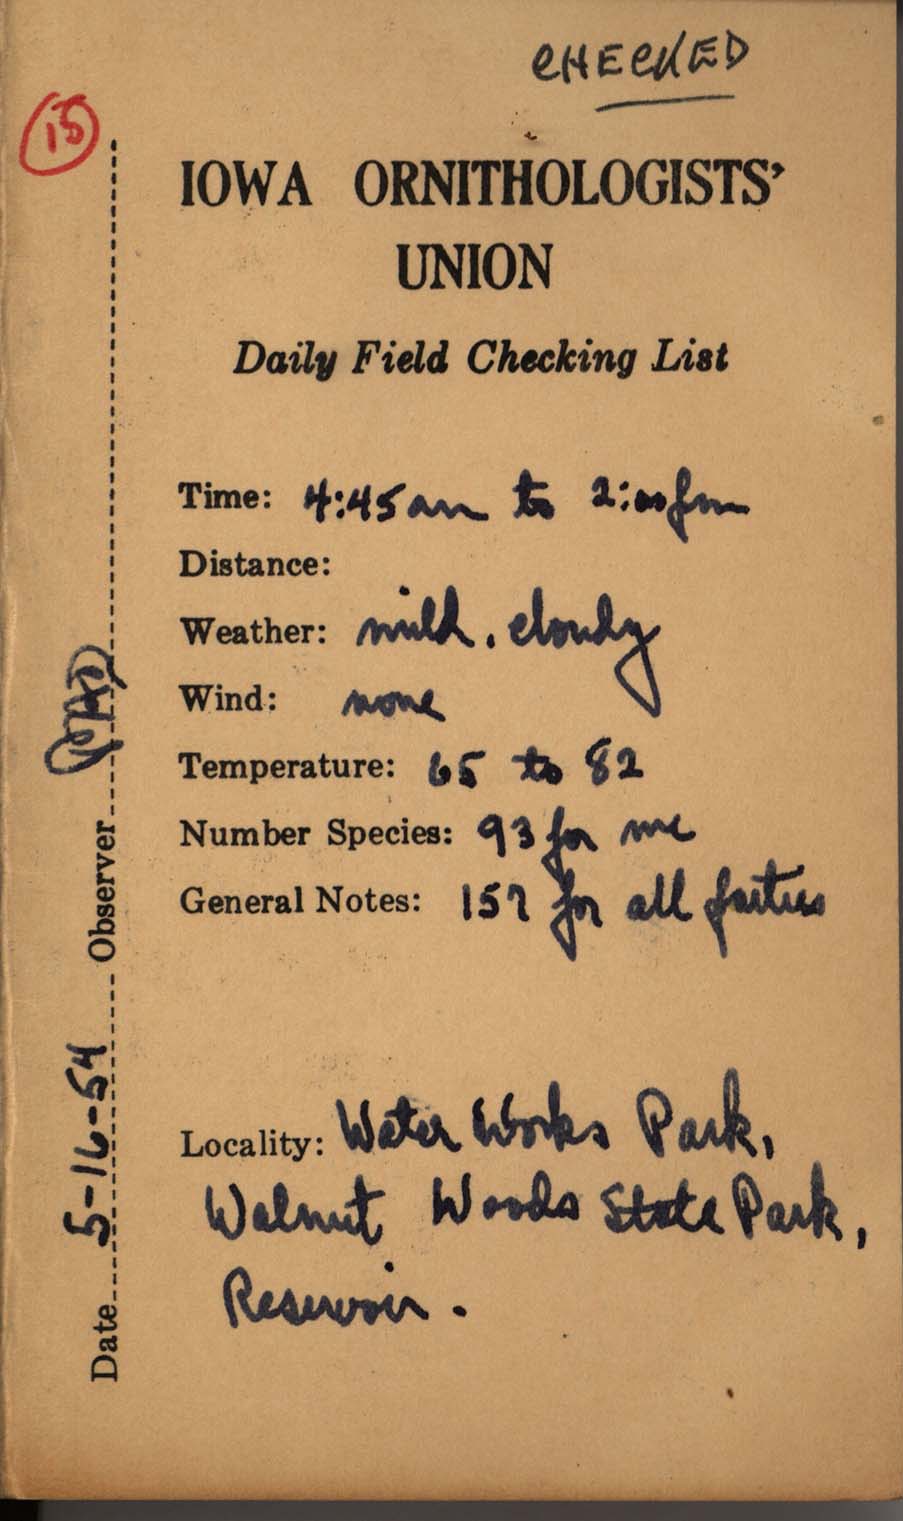 Daily field checking list, Philip DuMont, May 16, 1954